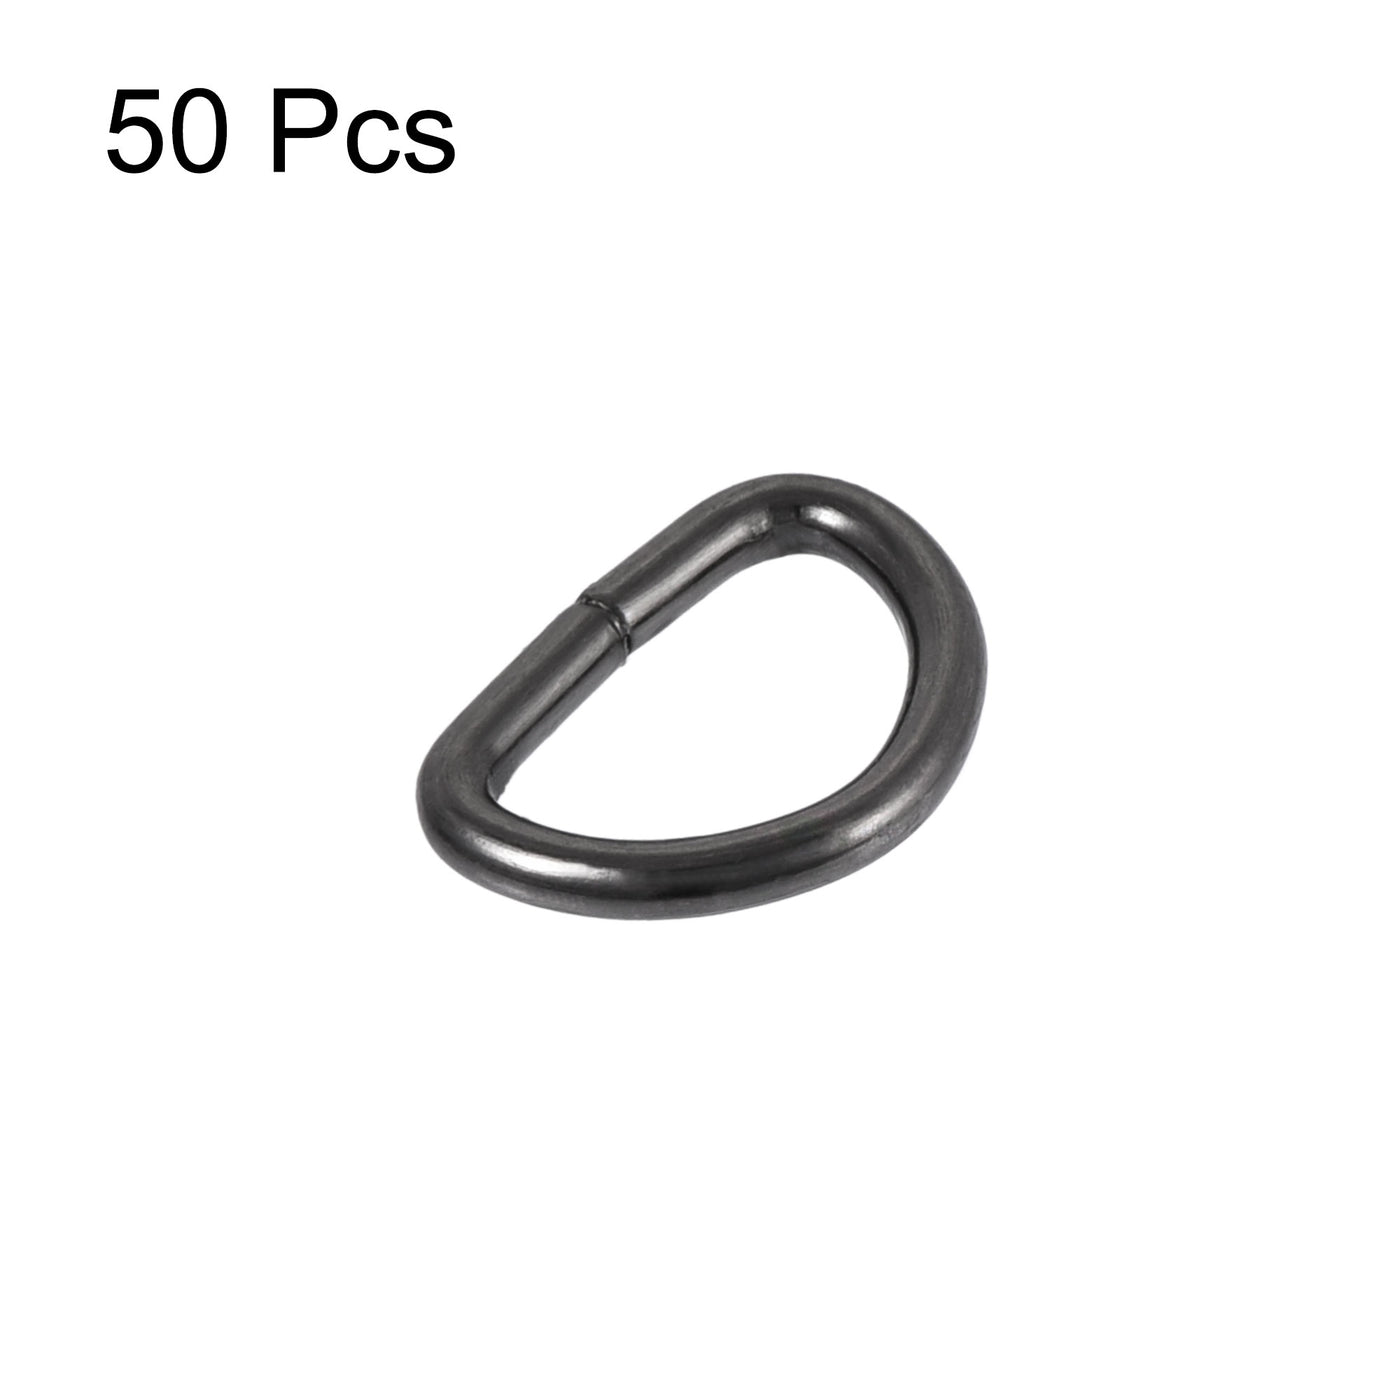 uxcell Uxcell Metal D Ring 0.39"(10mm) D-Rings Buckle for Hardware Bags Belts Craft DIY Accessories Black 50pcs